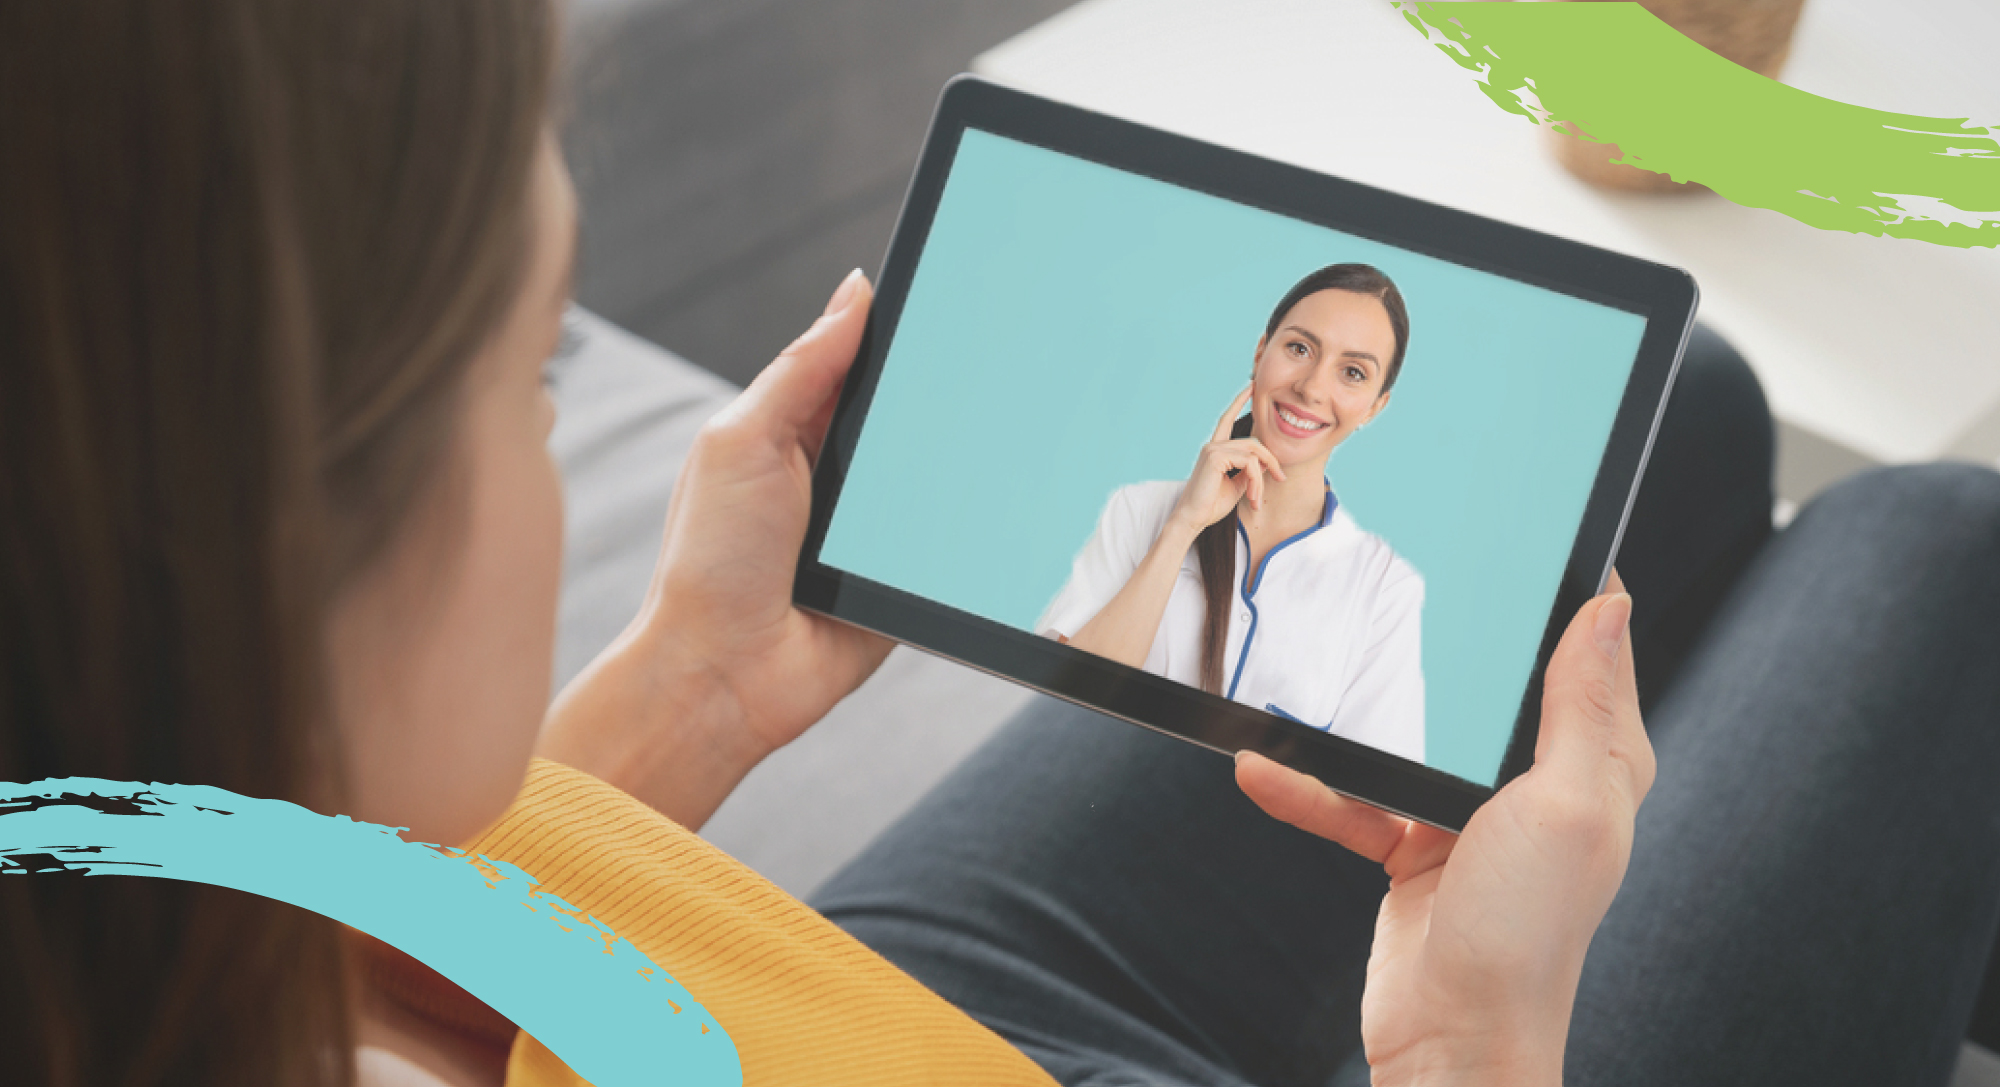 Telepsychiatry is available in New Jersey! ADHD, Mood & Behavior Center